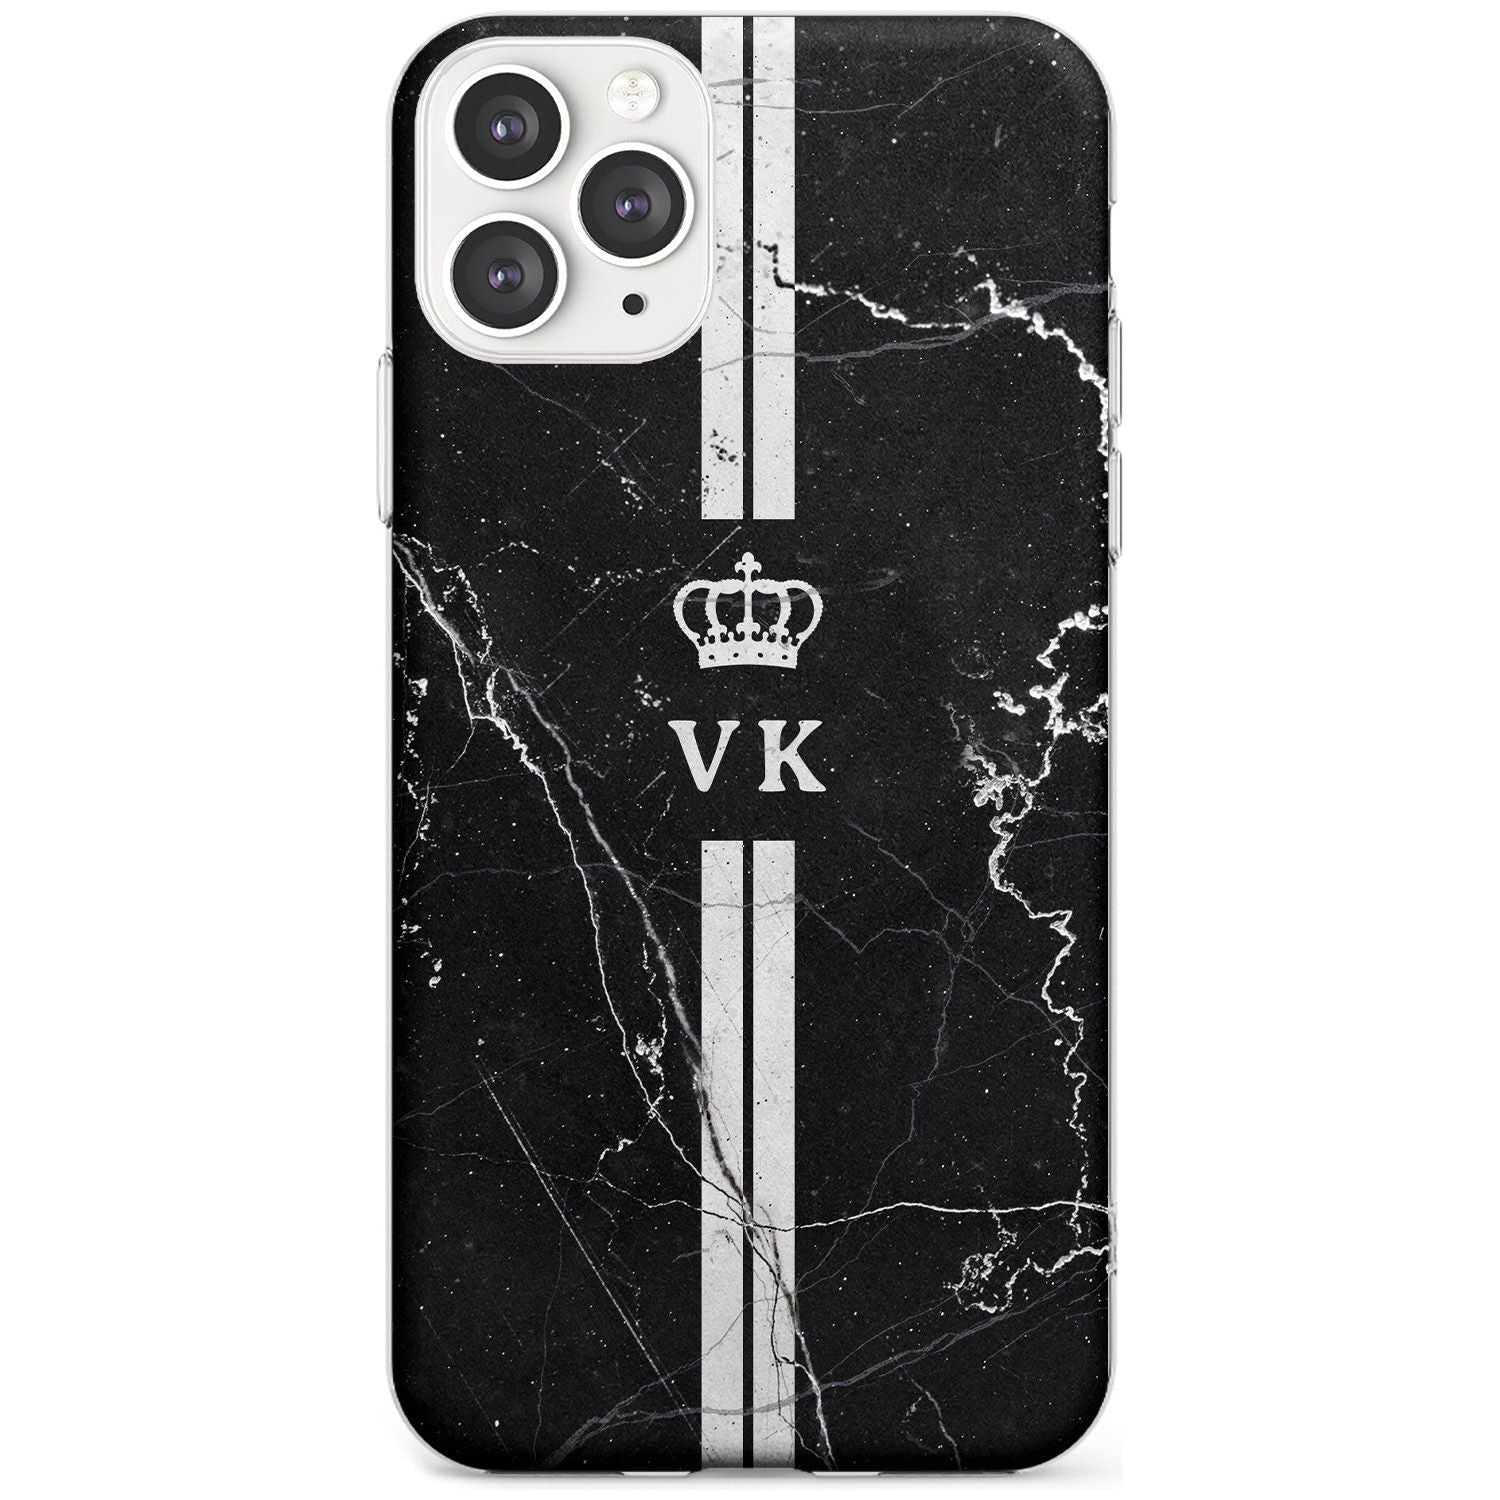 Stripes + Initials with Crown on Black Marble Slim TPU Phone Case for iPhone 11 Pro Max